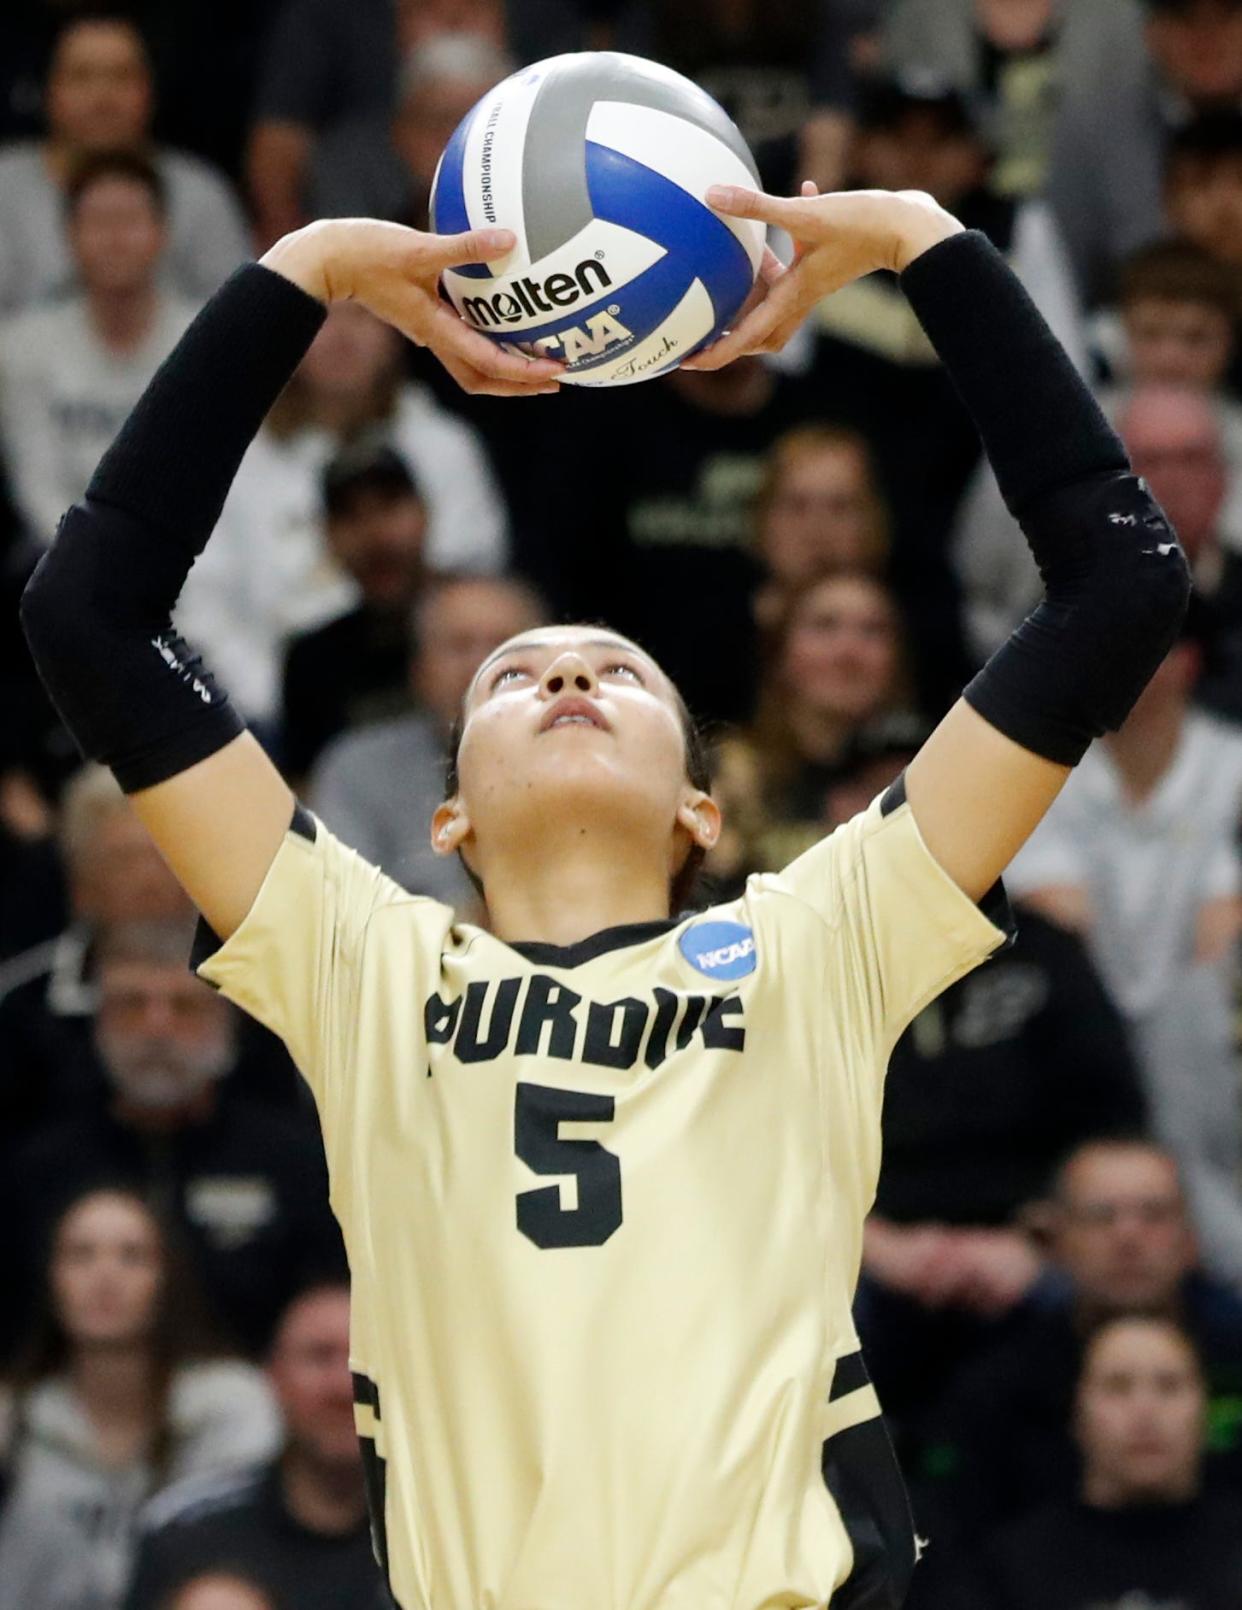 Purdue setter Taylor Anderson now has the program record for most assists in a match, set Friday night with 60 against Marquette.